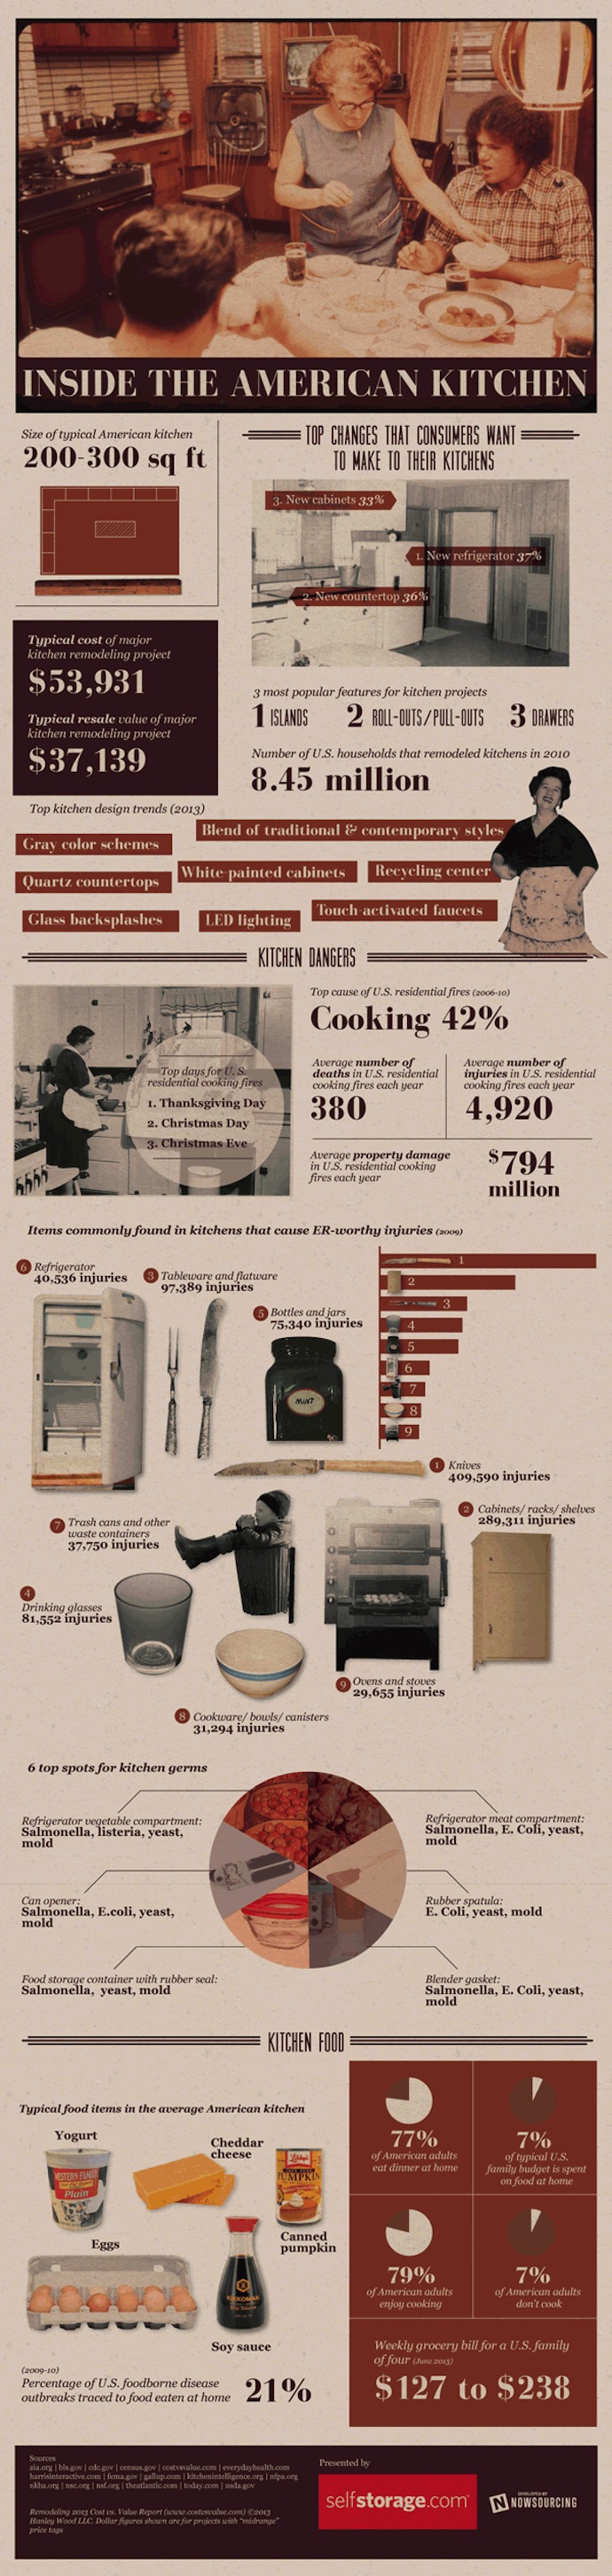 Statistics about kitchens in America